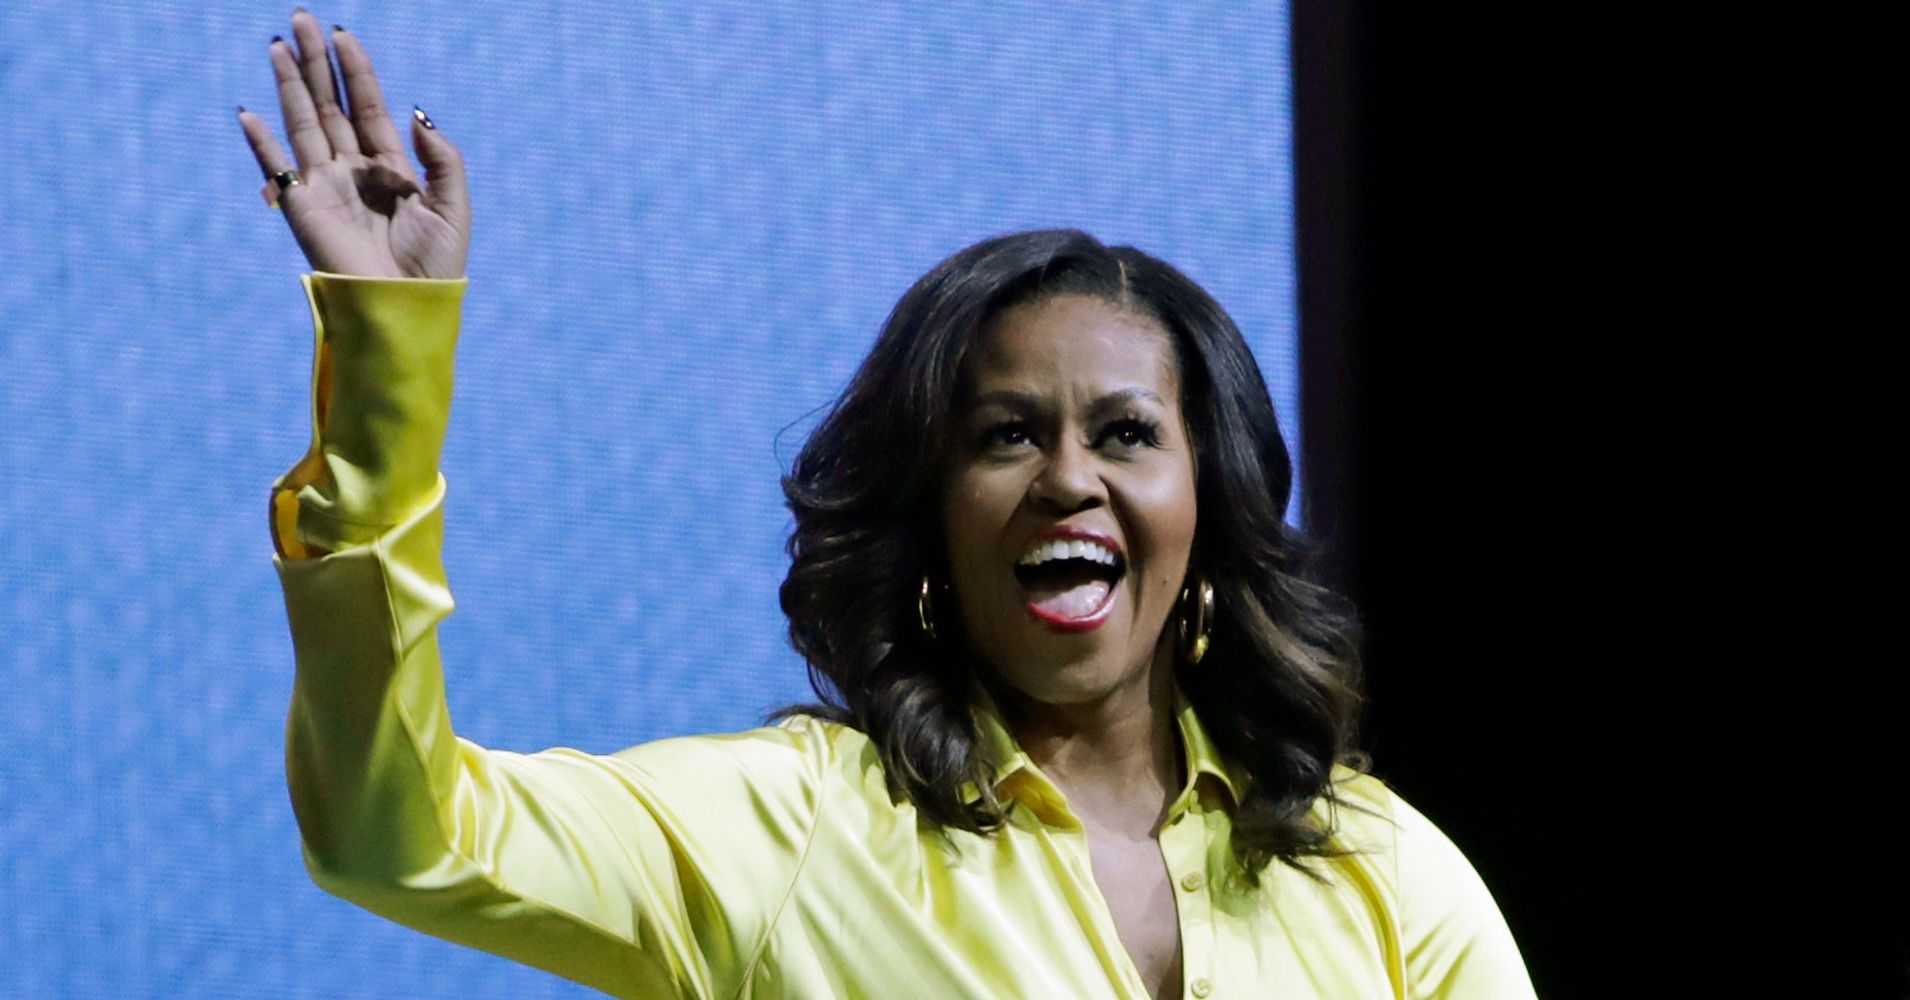 Michelle Obama Named 'Most Admired Woman' In Annual Gallup Survey ...